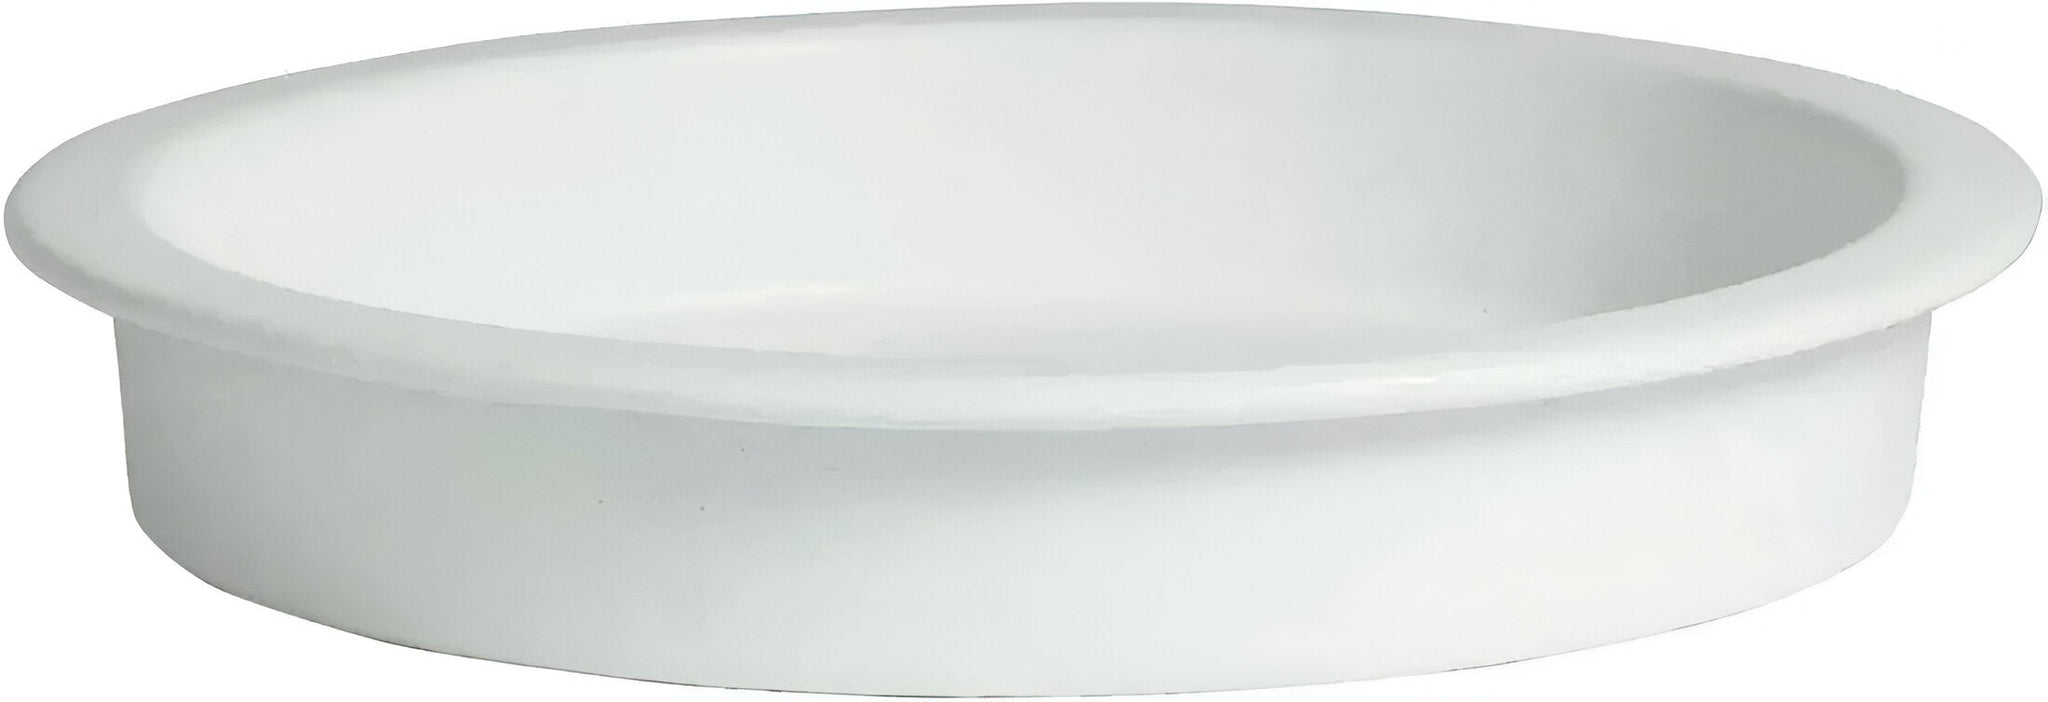 Bugambilia - Mod 5.3 Qt White Round Food Pan Without Divider With Glossy Smooth Finish - IR221-MOD-WW